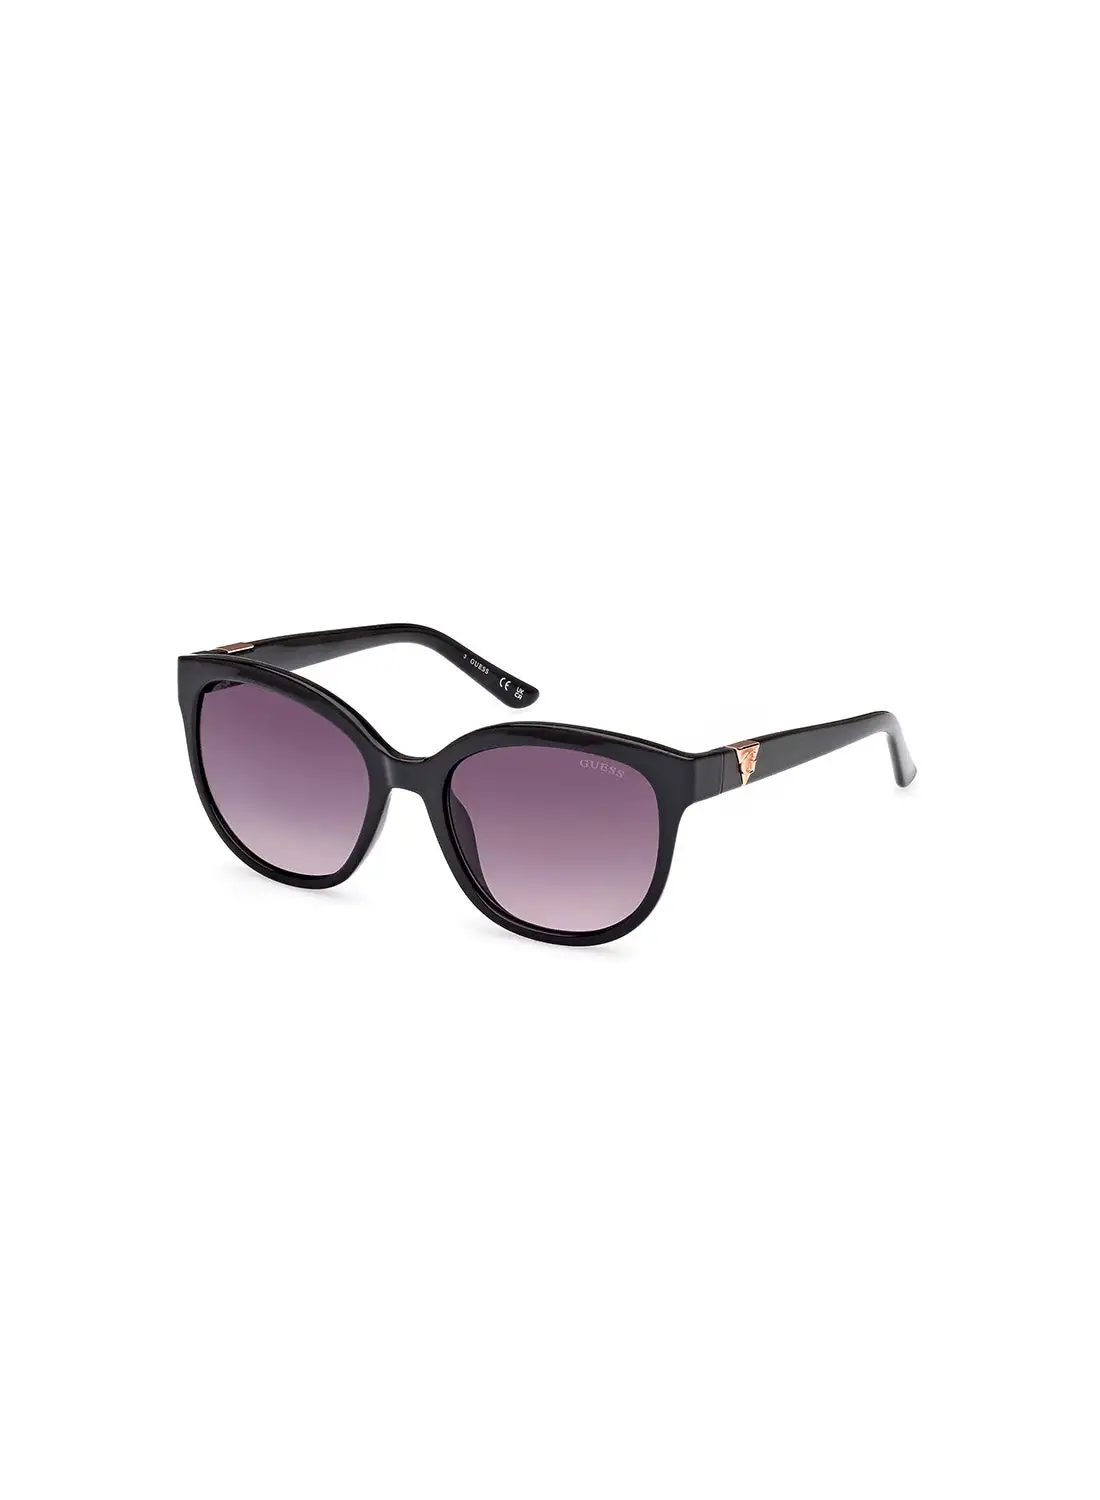 GUESS Women's UV Protection Round Sunglasses - GU787701B53 - Lens Size: 53 Mm